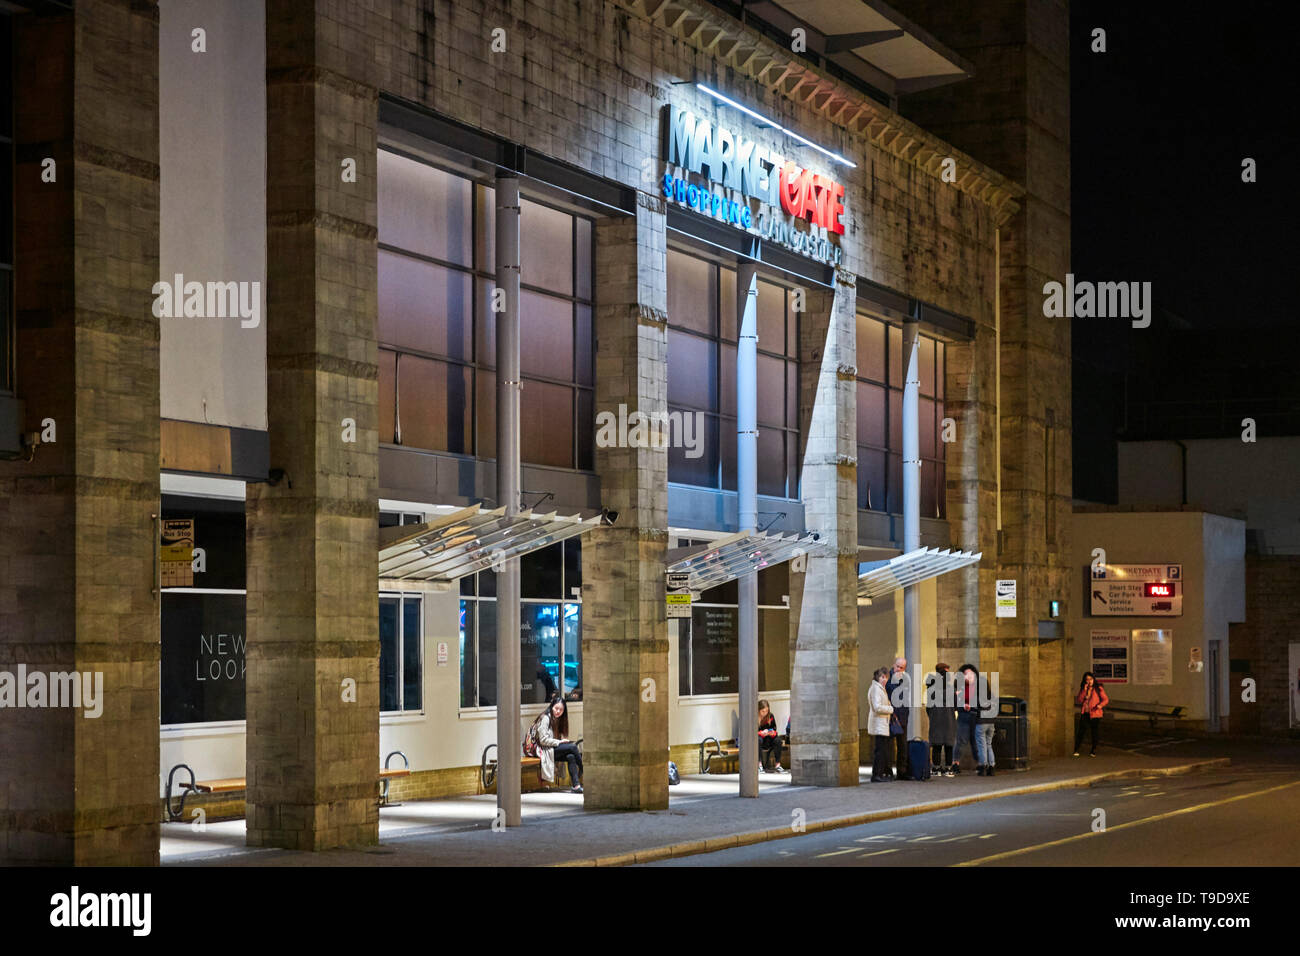 Market Gate bus station in Lancaster at night Stock Photo